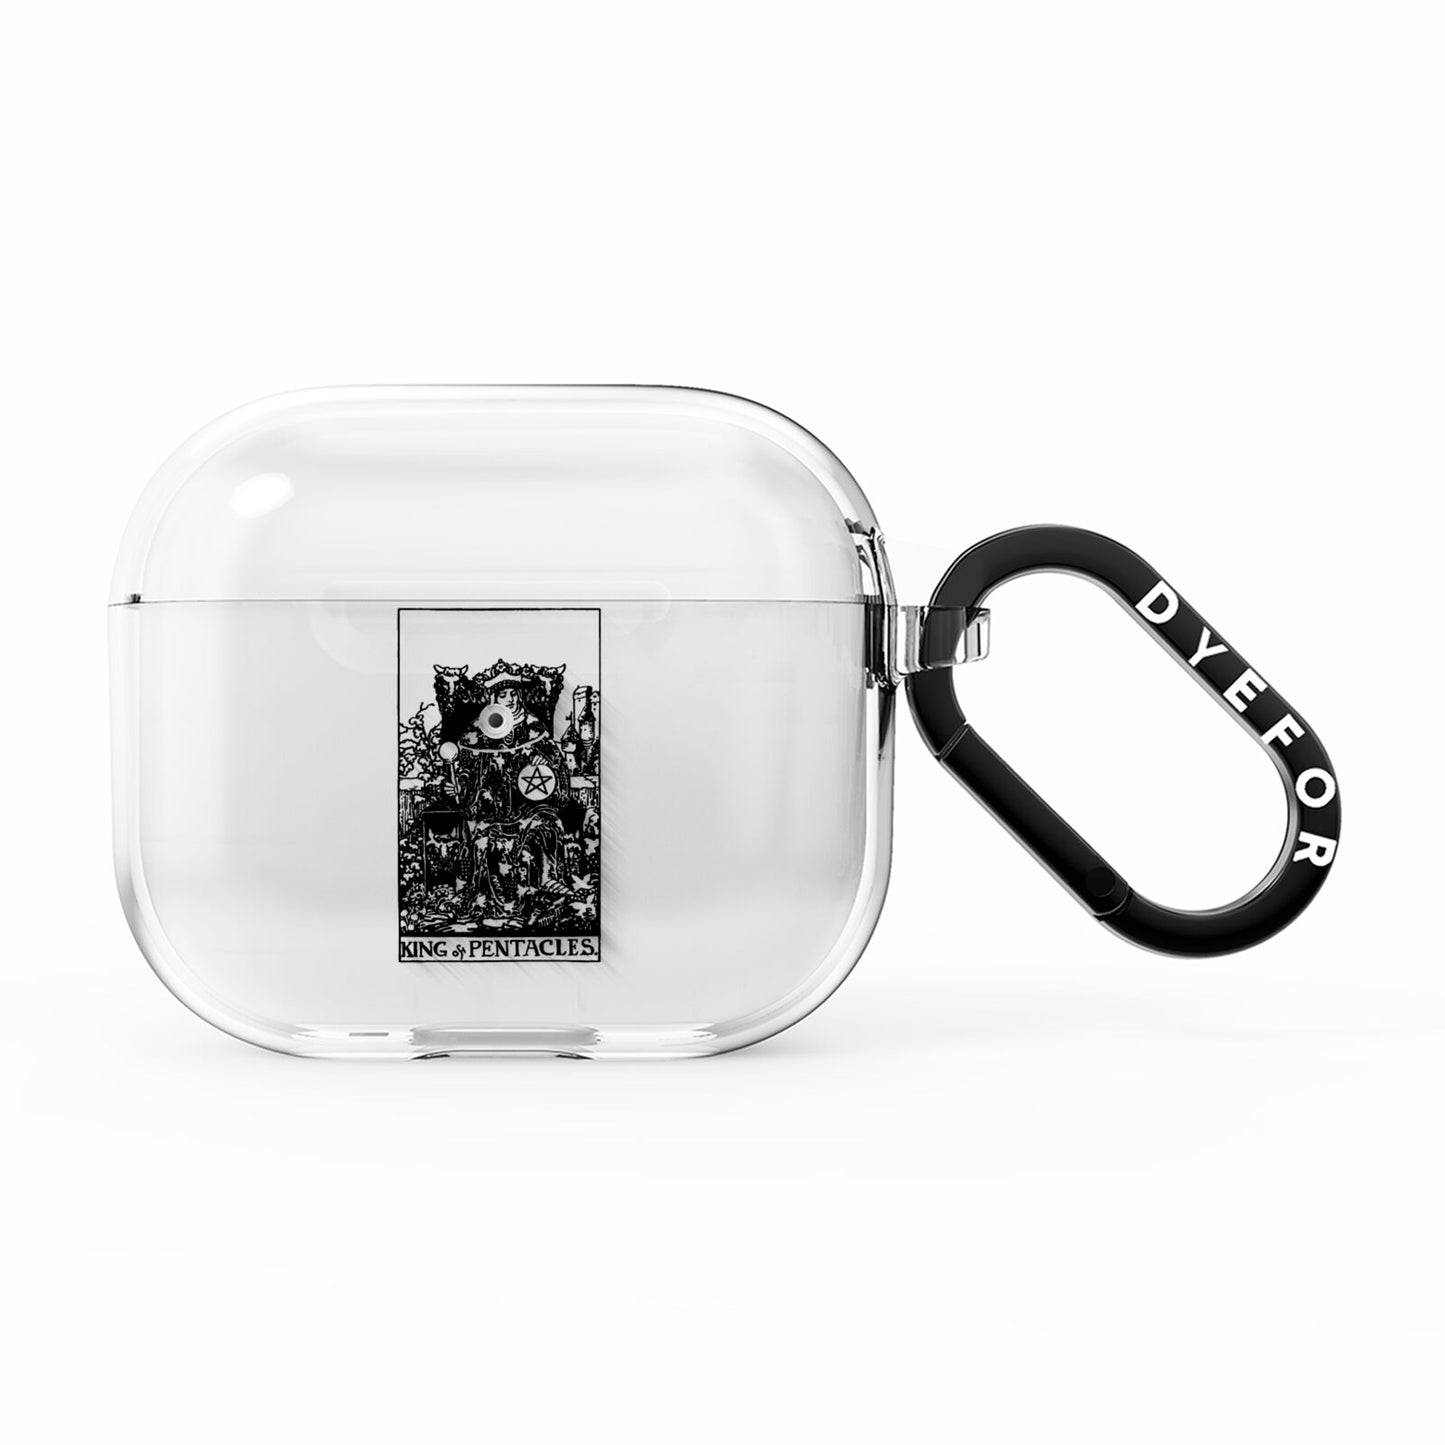 King of Pentacles Monochrome AirPods Clear Case 3rd Gen